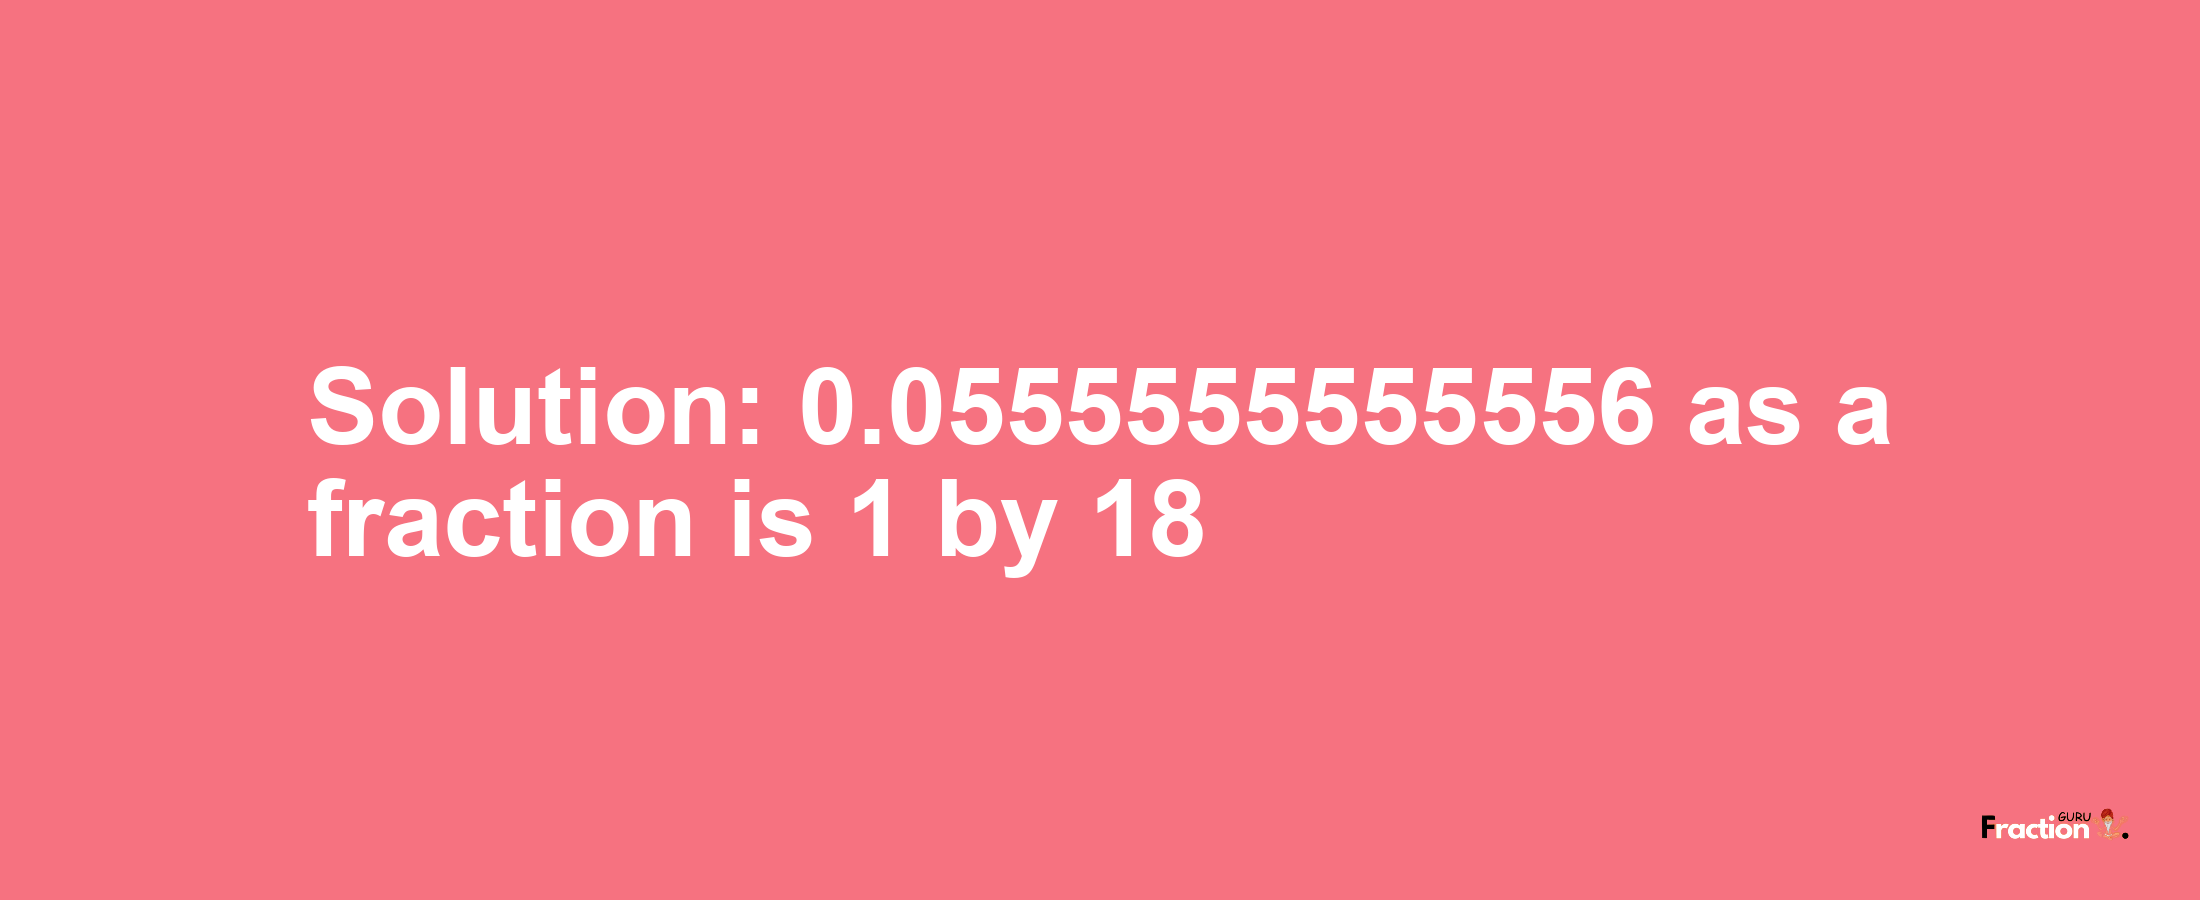 Solution:0.0555555555556 as a fraction is 1/18